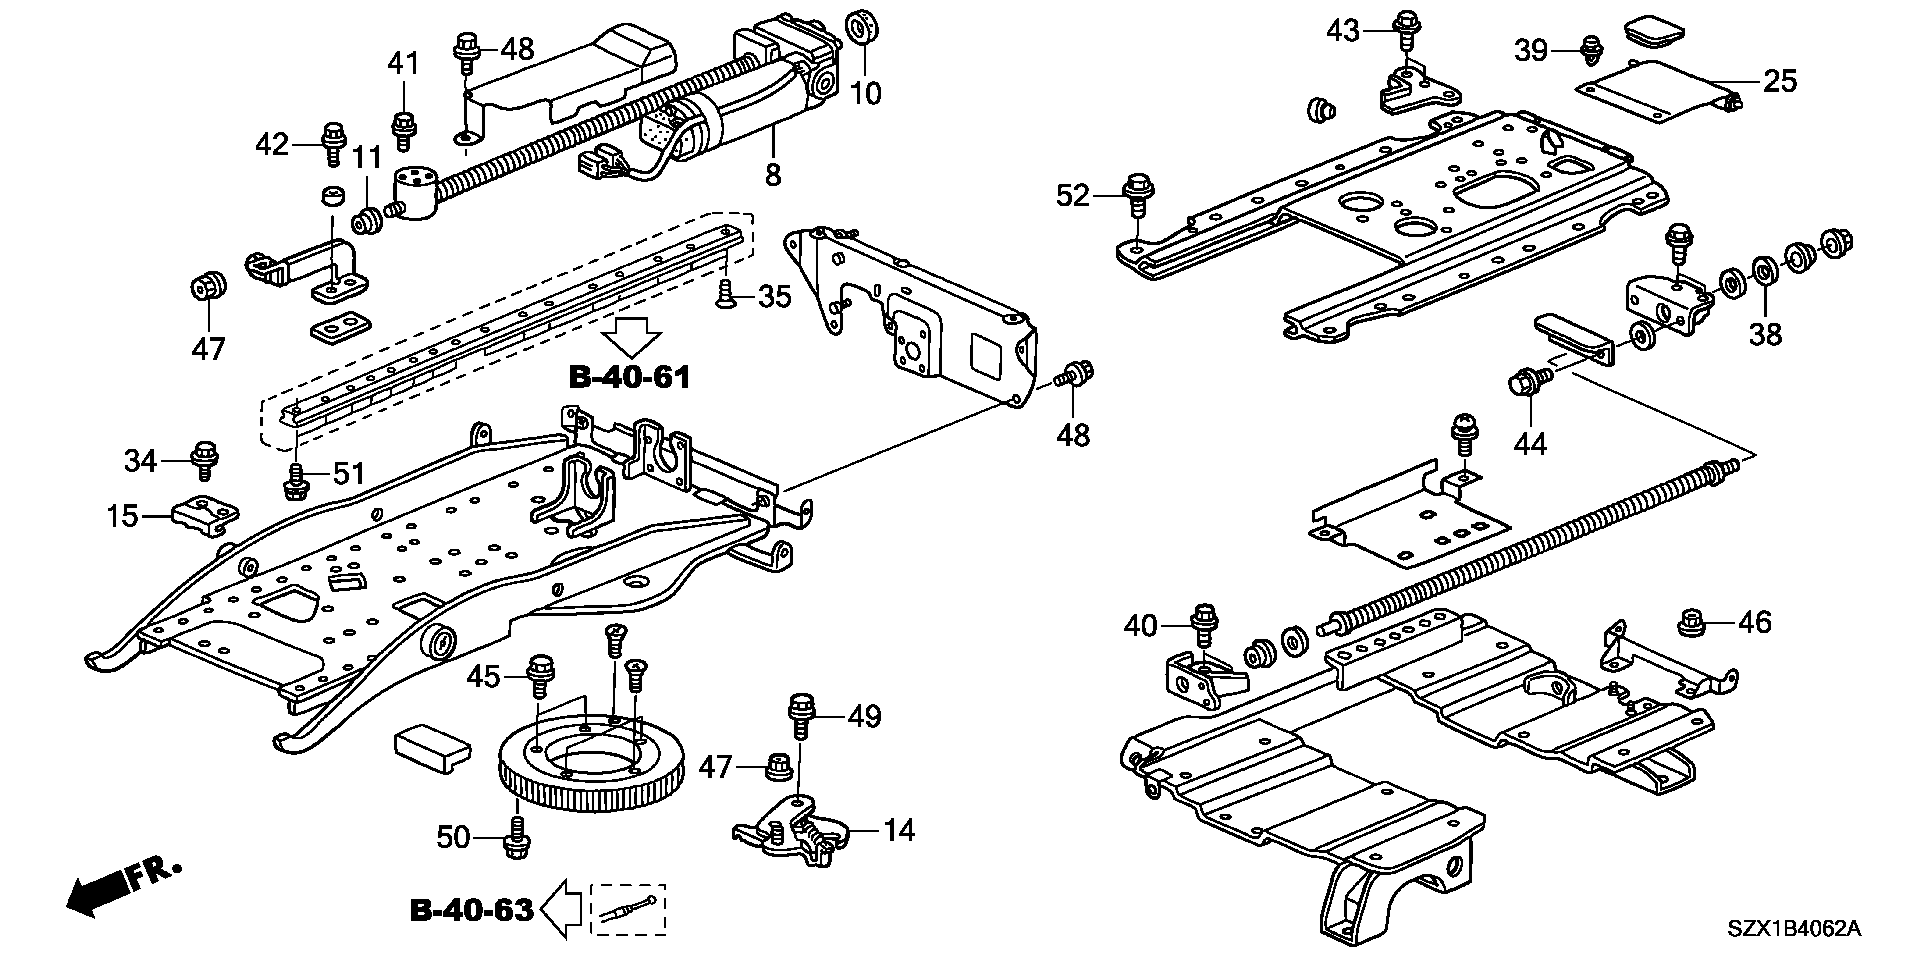 LIFTER  COMPONENT PARTS (2) ( SIDE LIFT UP SEAT)